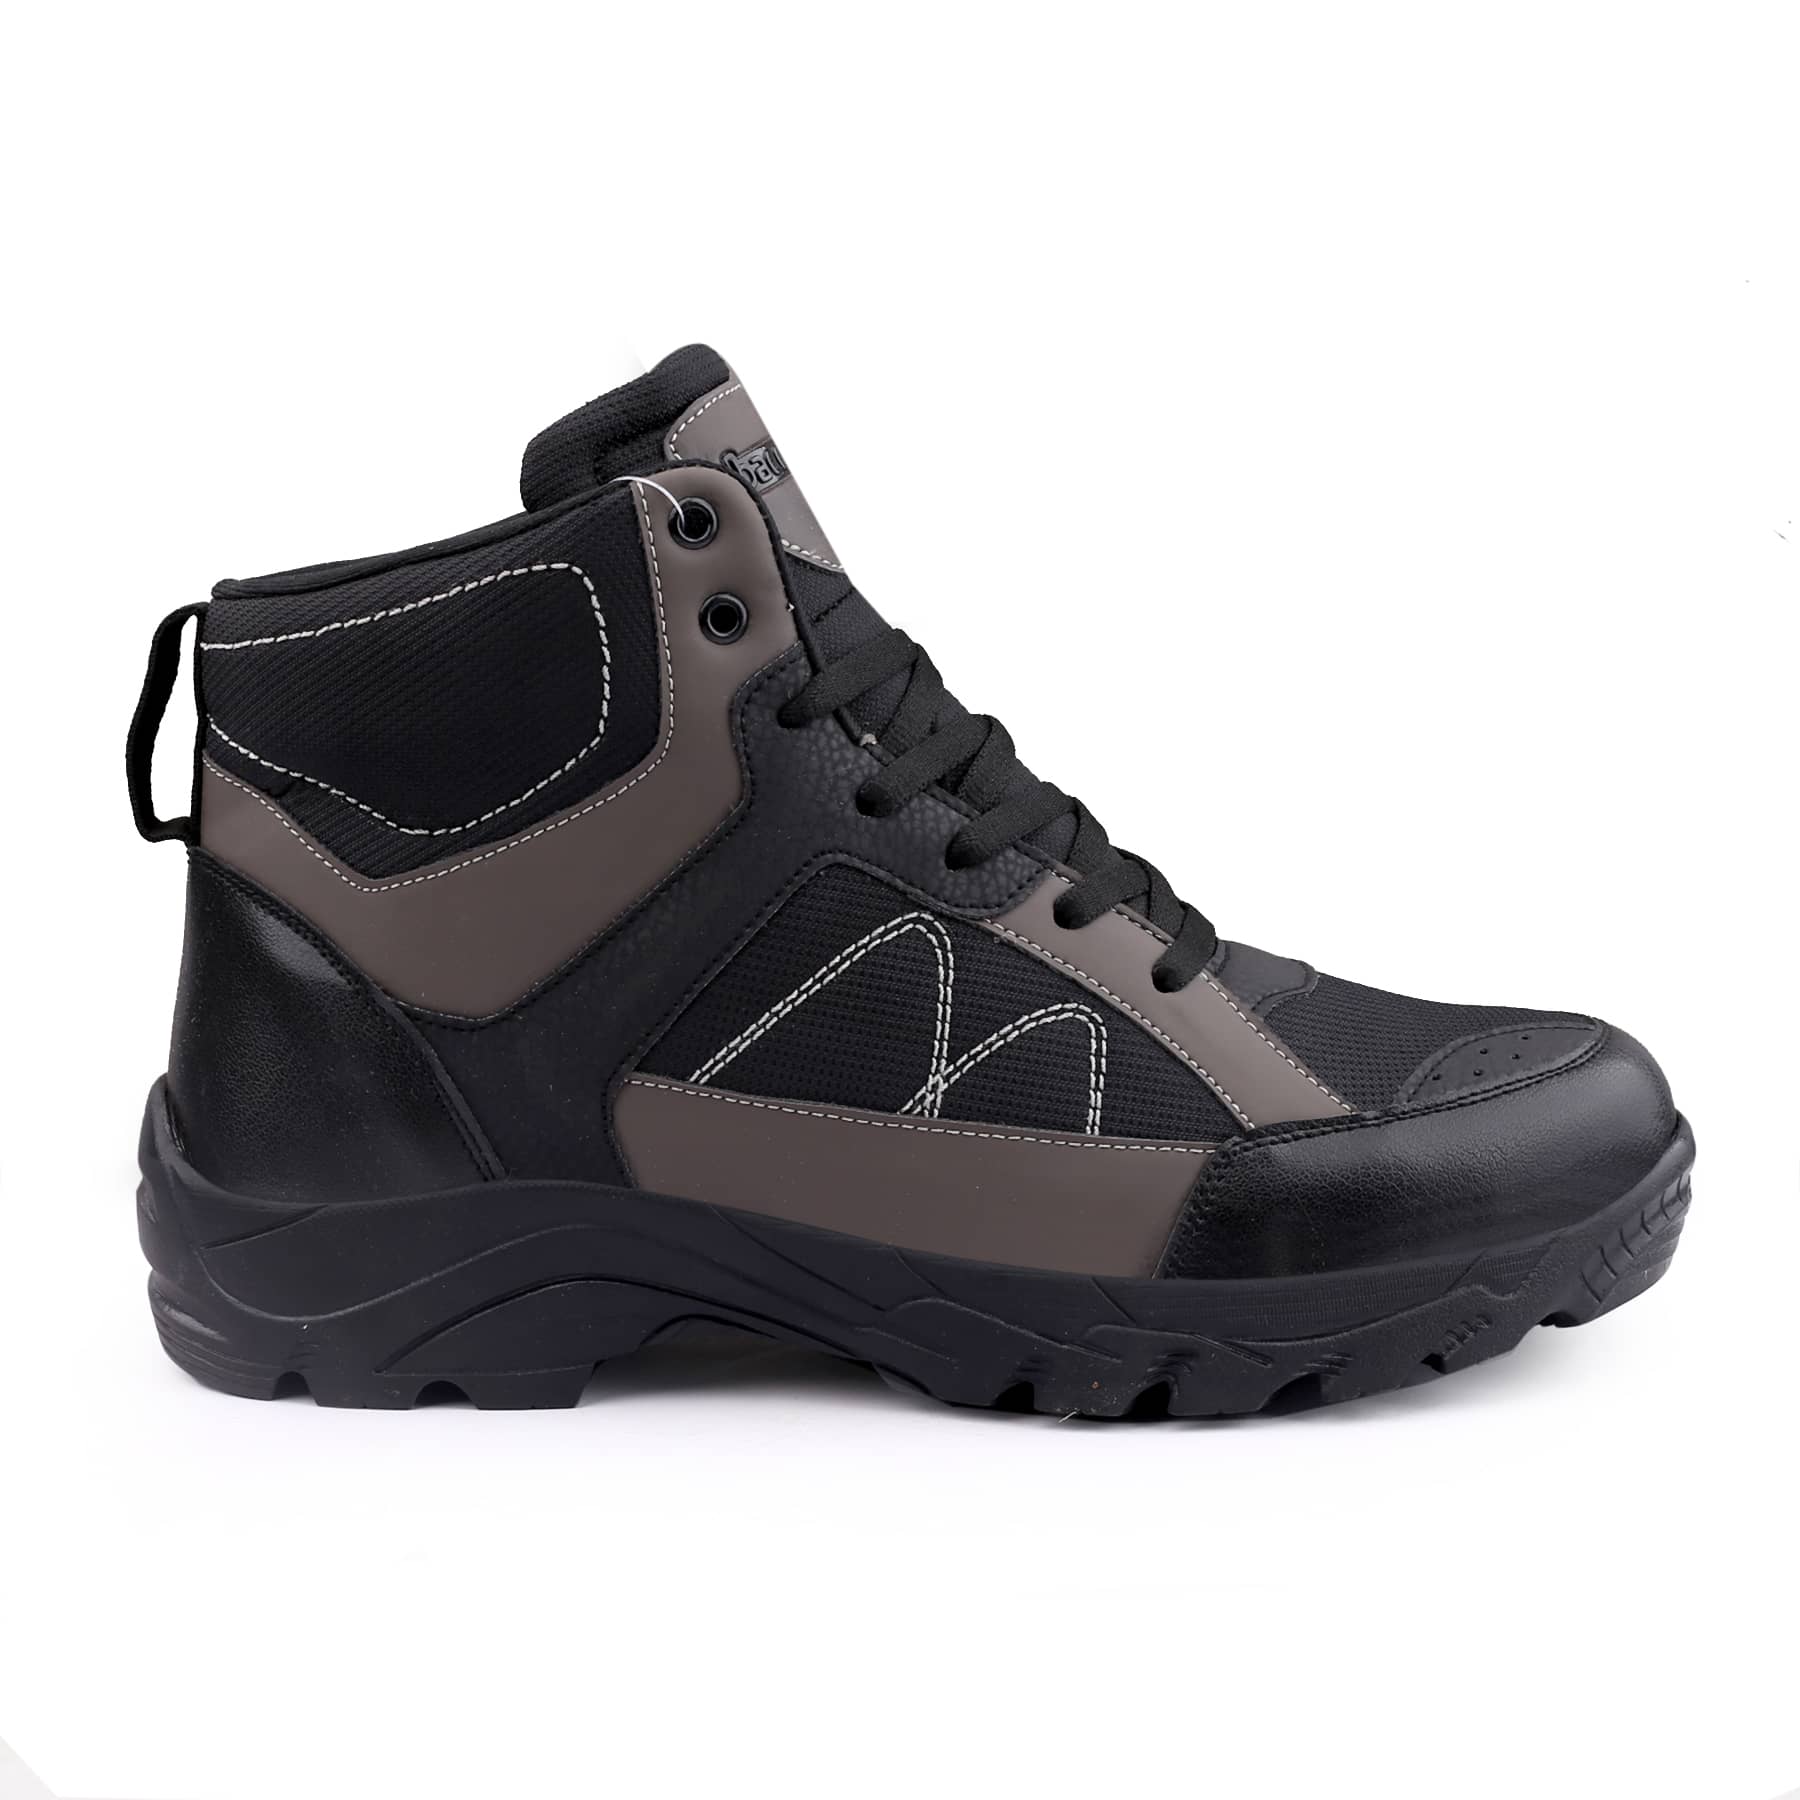 Bacca Bucci SOLDIER: Ultra Pioneer High-Top Waterproof Boots for Hiking, Trekking, Mountaineering & Climbing